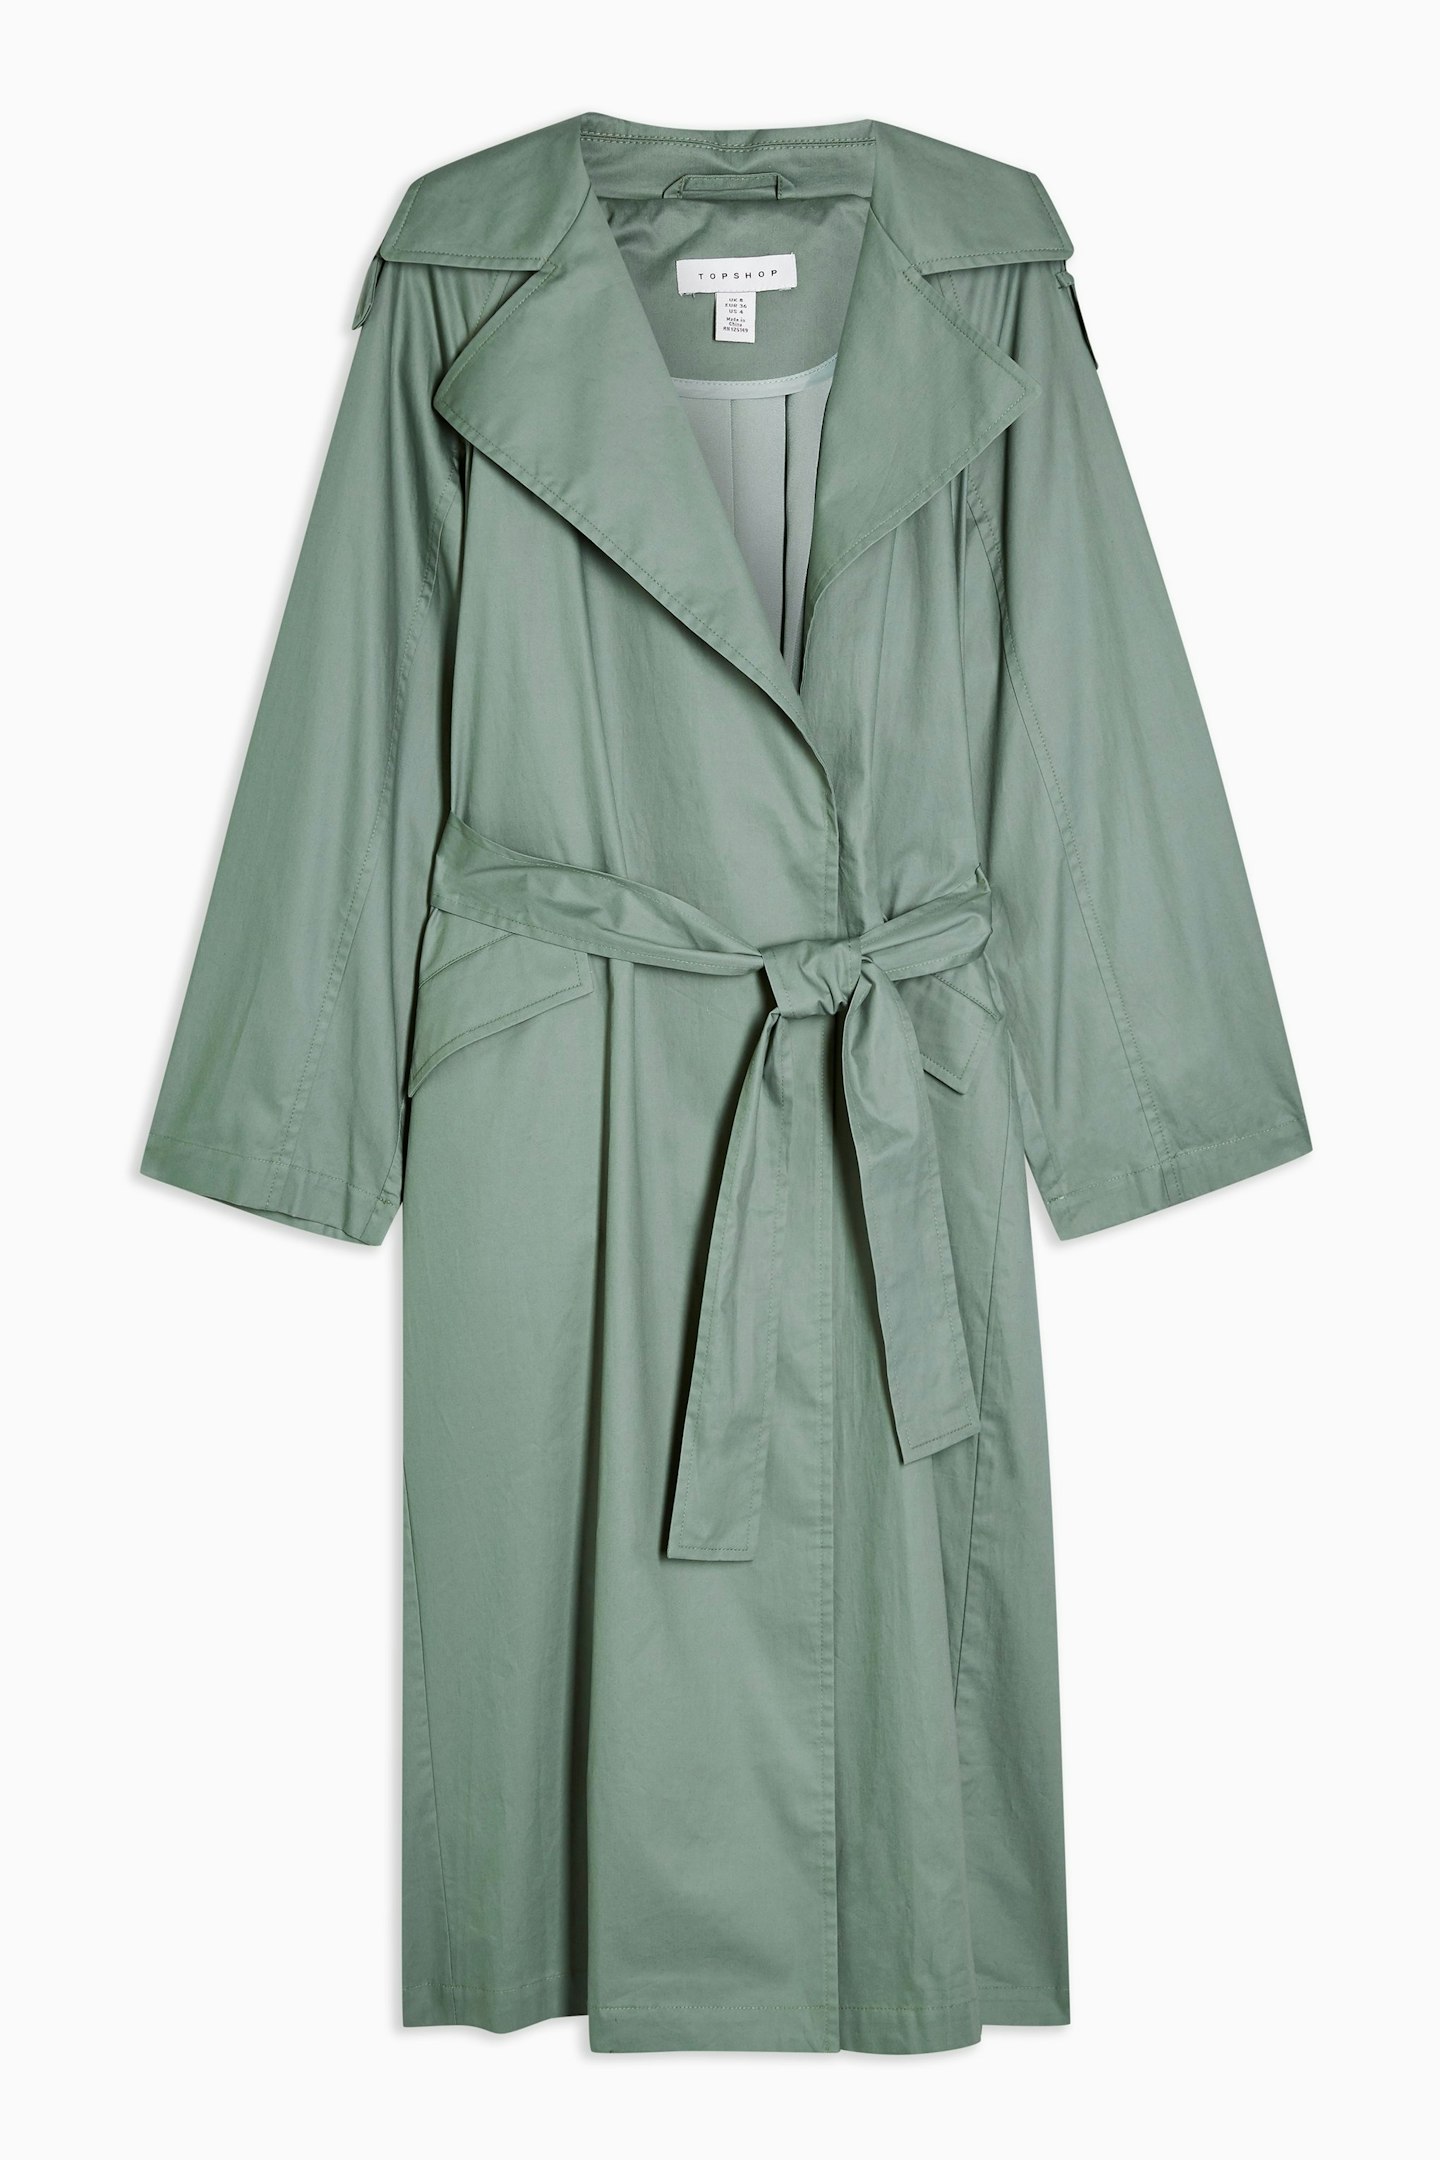 Topshop, Sage Pleated Back Trench, Was £79, Now £71.10